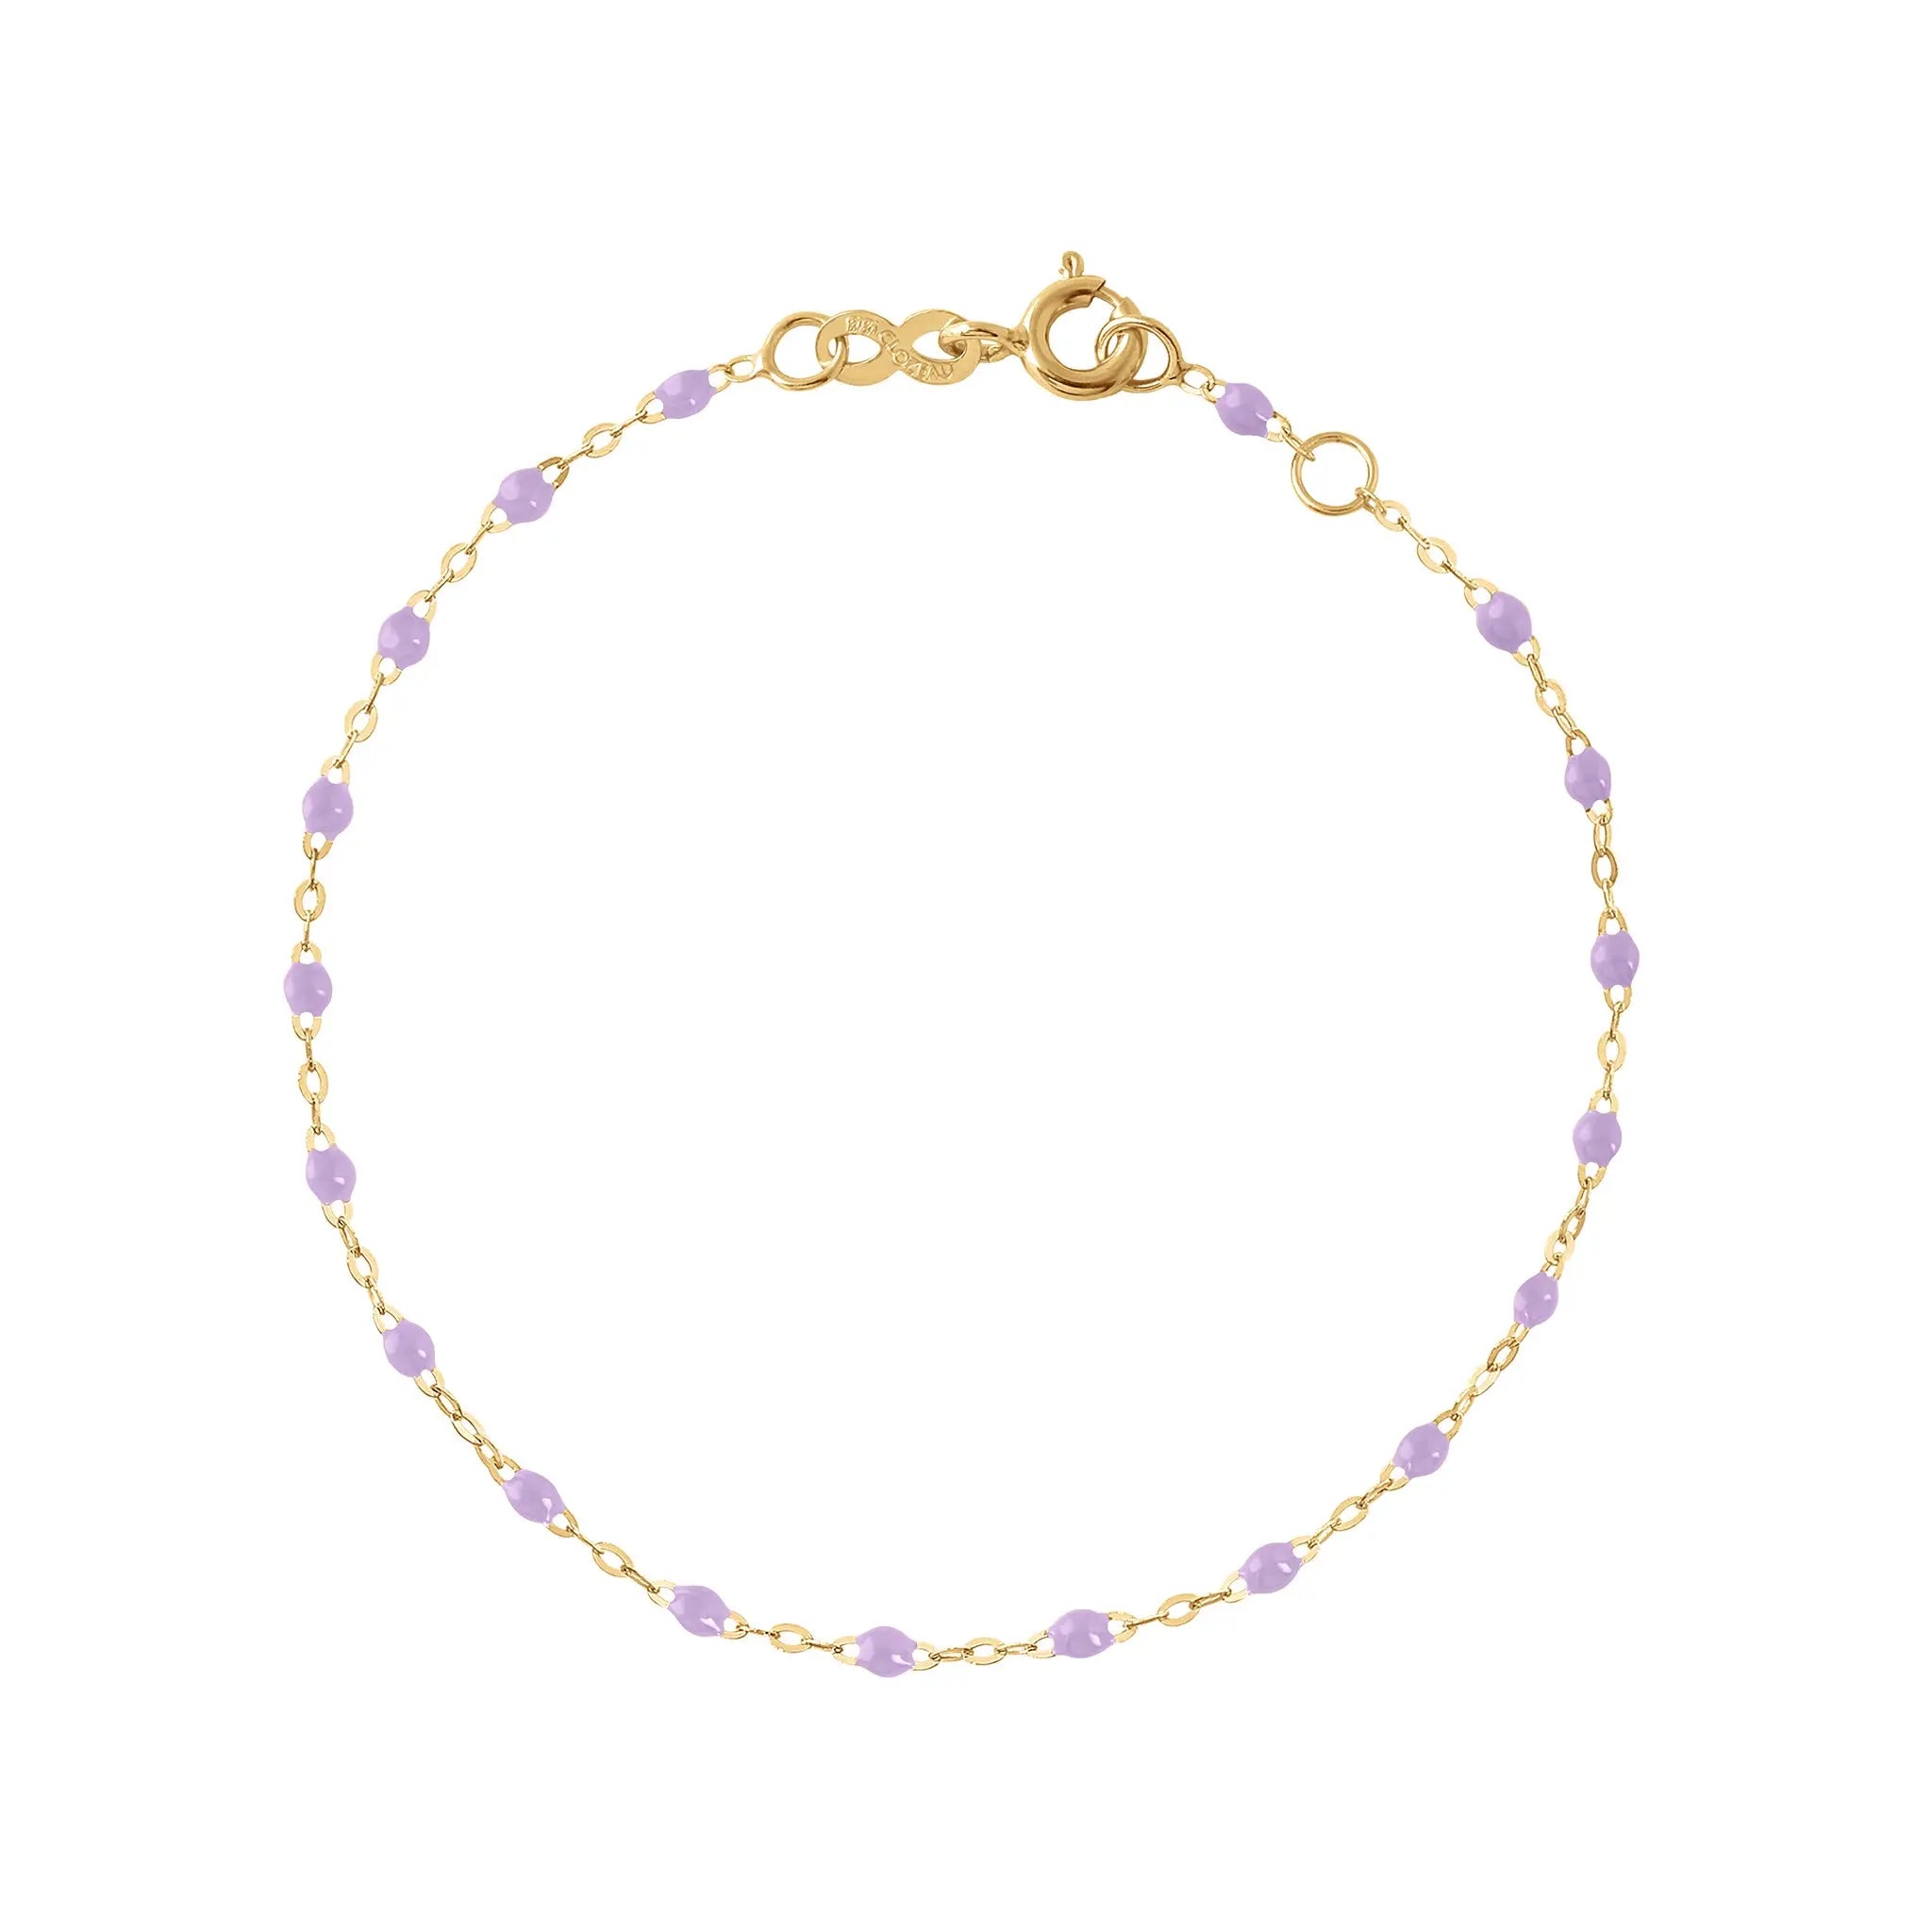 The Classic Gigi bracelet by gigi CLOZEAU features 18K Yellow Gold, and unique Lilac jewels for a simple, everyday look.   Each jewel is unique, artisanally made in their family-owned workshop. 18K yellow gold and resin. The bracelet measures 6.7 inches with adjustable clasp at 6.3 inches.